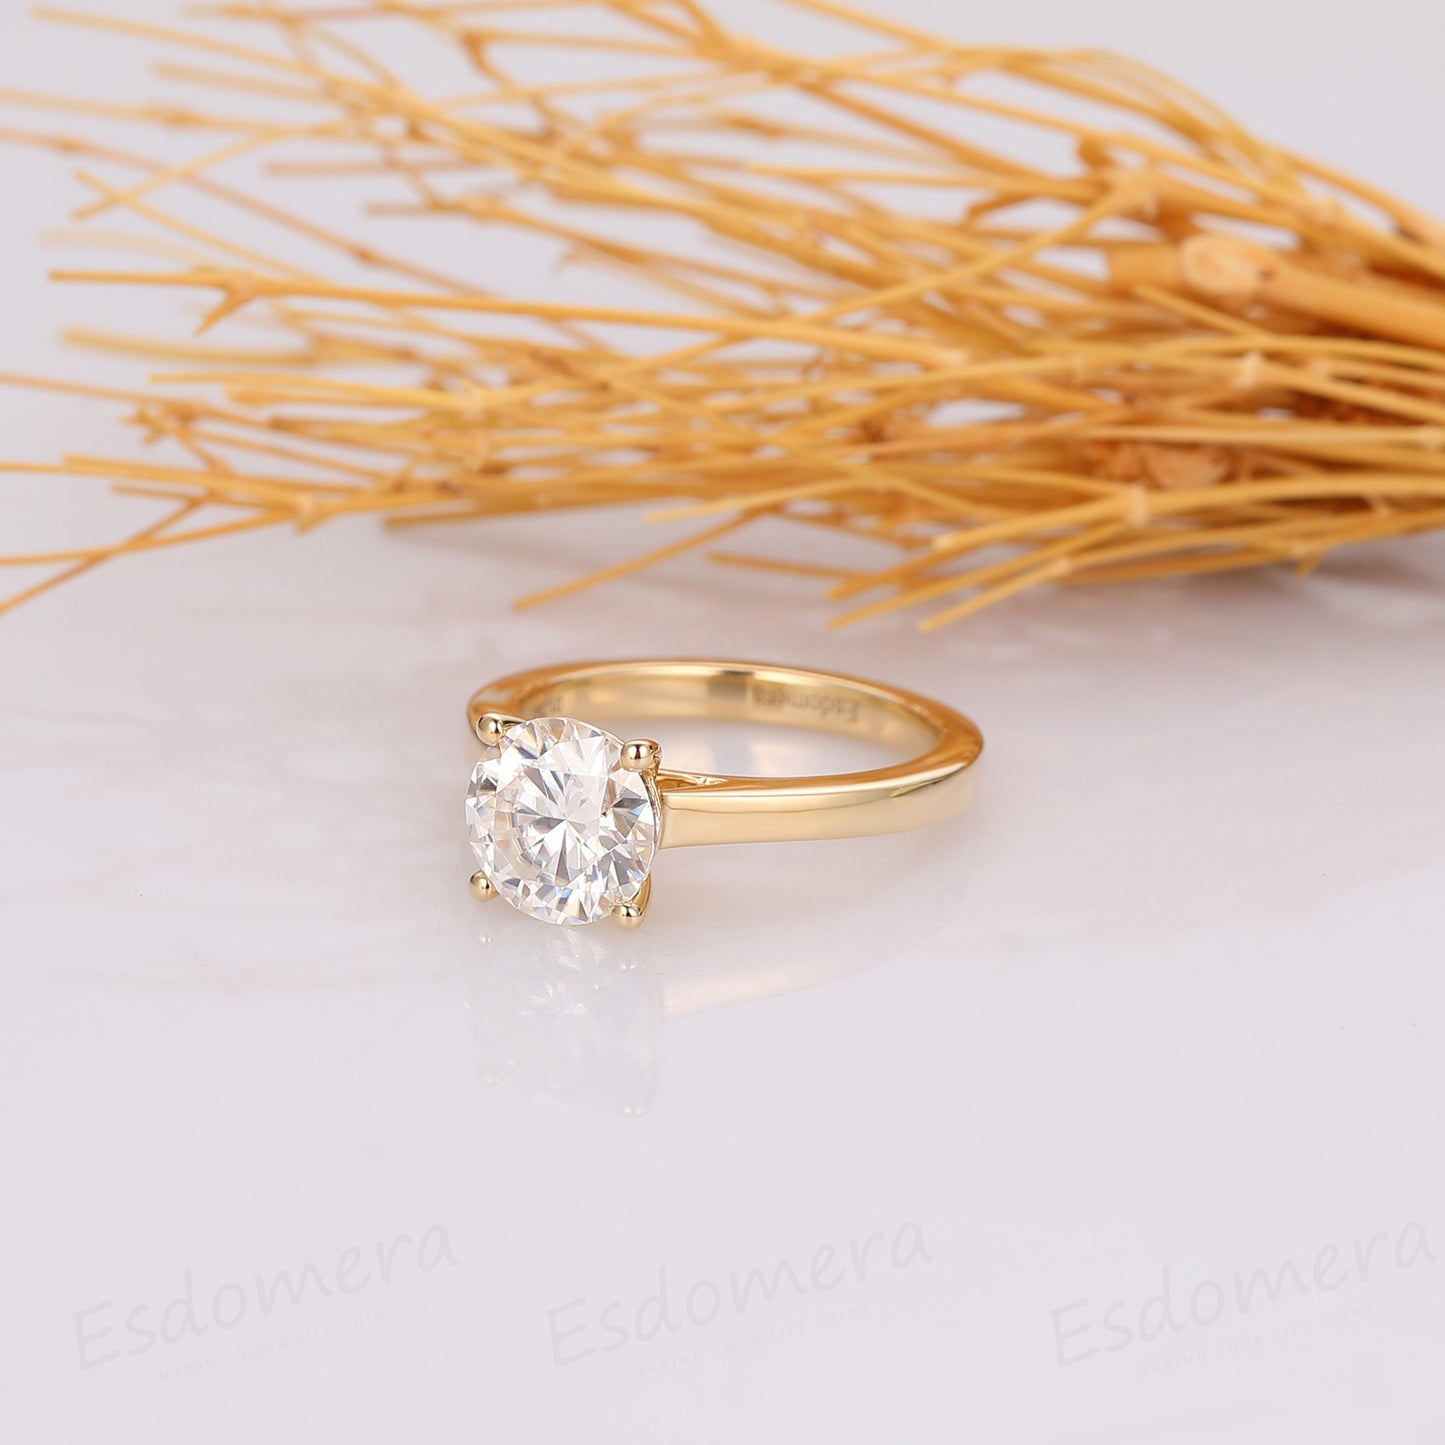 Comfort Fit Engagement Ring, Yellow Gold Simple Solitaire Ring, 1.25CT Round Moissanite Ring